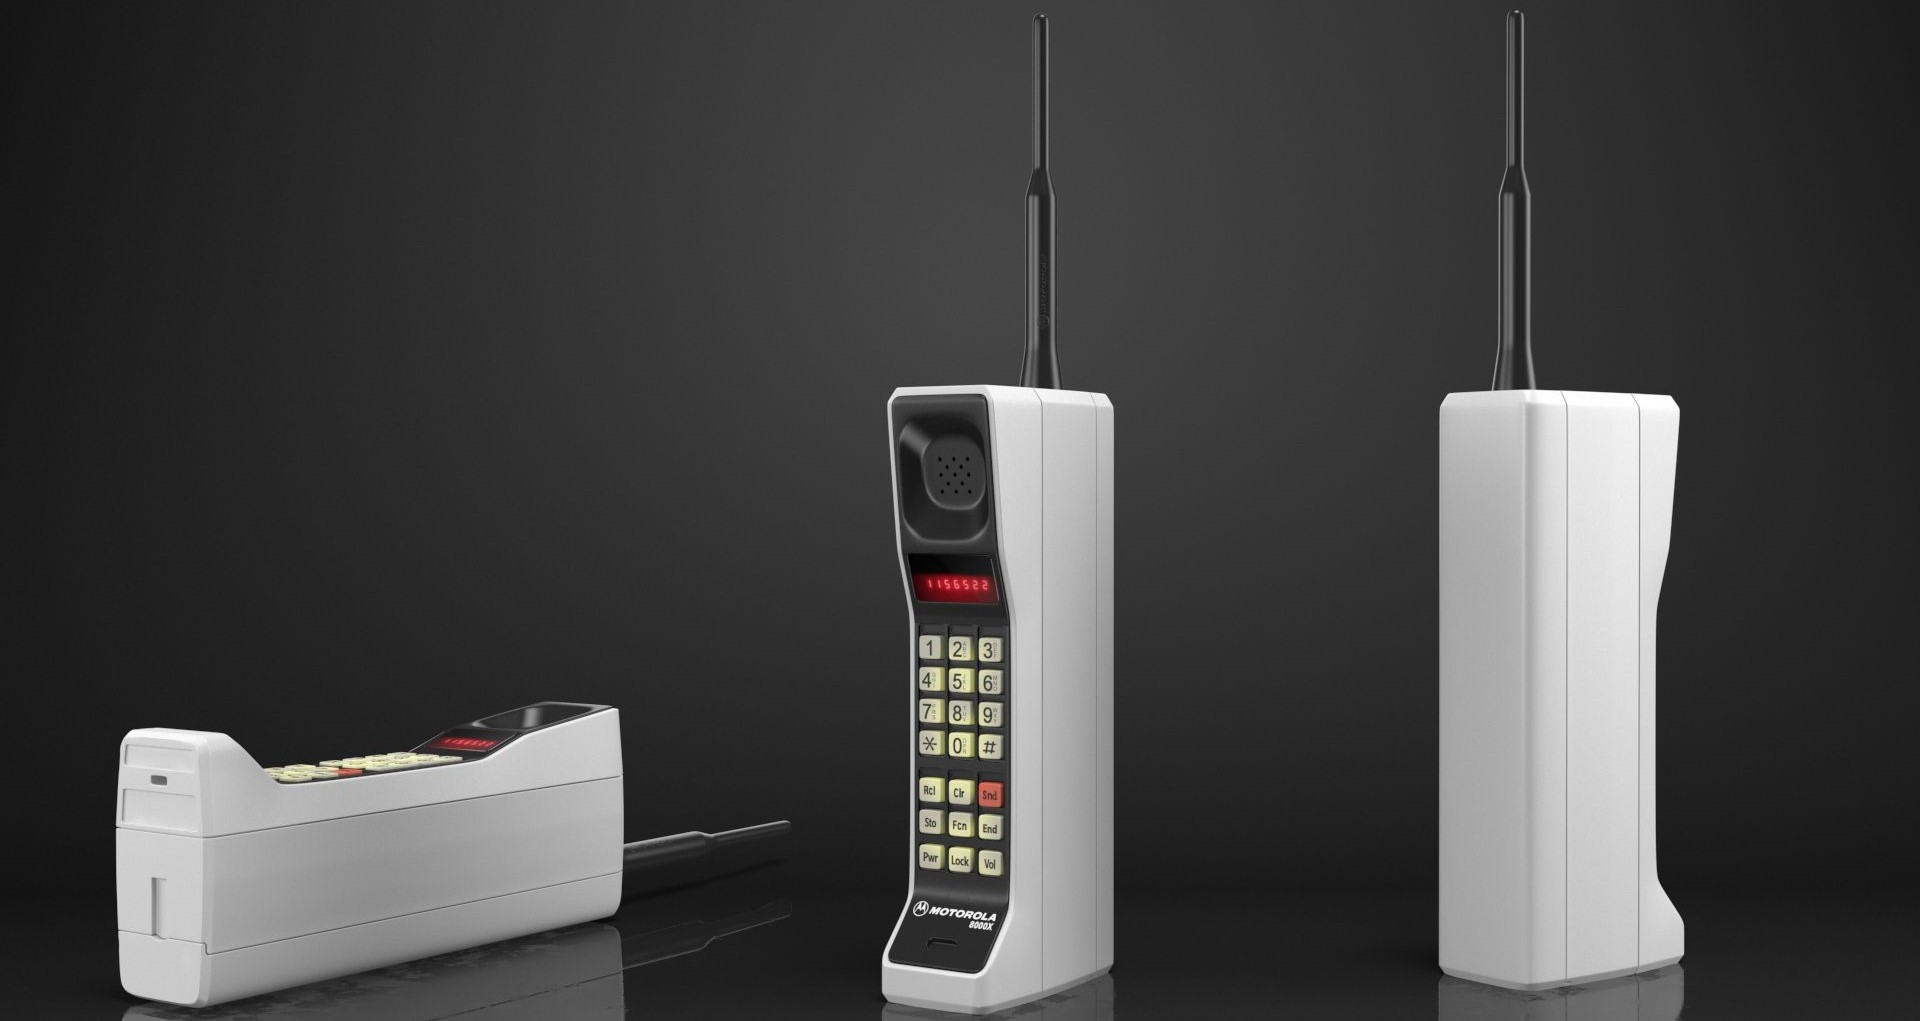 The Motorola DynaTAC 8000X, which launched on the market in 1983